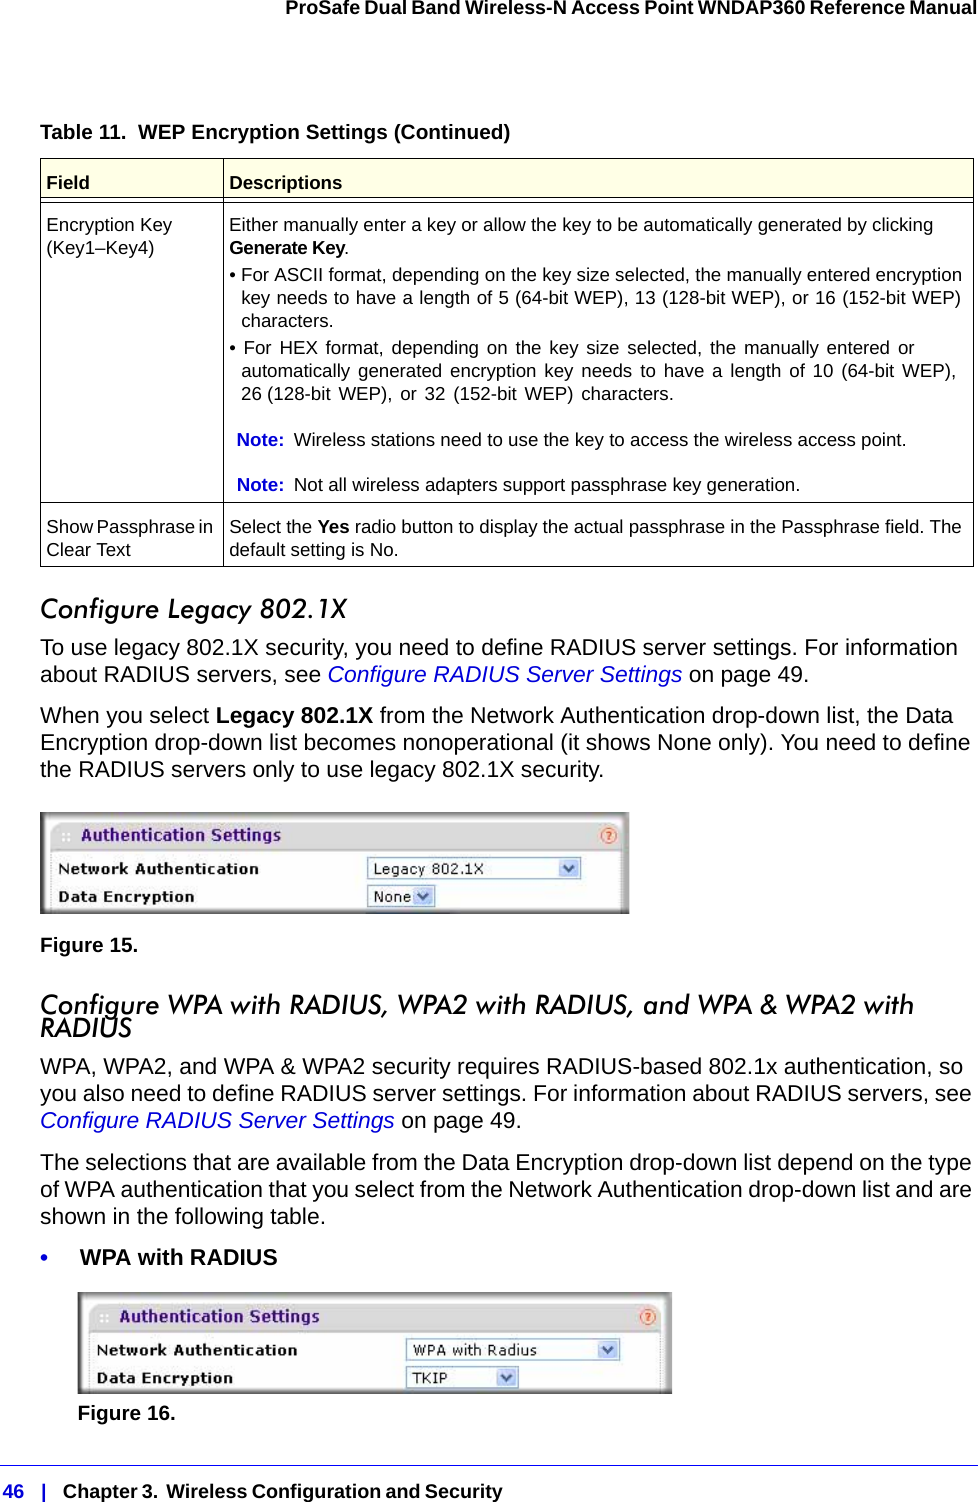 46   |   Chapter 3.  Wireless Configuration and Security  ProSafe Dual Band Wireless-N Access Point WNDAP360 Reference Manual Configure Legacy 802.1XTo use legacy 802.1X security, you need to define RADIUS server settings. For information about RADIUS servers, see Configure RADIUS Server Settings on page 49.When you select Legacy 802.1X from the Network Authentication drop-down list, the Data Encryption drop-down list becomes nonoperational (it shows None only). You need to define the RADIUS servers only to use legacy 802.1X security.Figure 15. Configure WPA with RADIUS, WPA2 with RADIUS, and WPA &amp; WPA2 with RADIUSWPA, WPA2, and WPA &amp; WPA2 security requires RADIUS-based 802.1x authentication, so you also need to define RADIUS server settings. For information about RADIUS servers, see Configure RADIUS Server Settings on page 49.The selections that are available from the Data Encryption drop-down list depend on the type of WPA authentication that you select from the Network Authentication drop-down list and are shown in the following table.•     WPA with RADIUSFigure 16.  Encryption Key (Key1–Key4) Either manually enter a key or allow the key to be automatically generated by clicking Generate Key.• For ASCII format, depending on the key size selected, the manually entered encryption key needs to have a length of 5 (64-bit WEP), 13 (128-bit WEP), or 16 (152-bit WEP) characters.• For HEX format, depending on the key size selected, the manually entered or automatically generated encryption key needs to have a length of 10 (64-bit WEP), 26 (128-bit WEP), or 32 (152-bit WEP) characters.Note: Wireless stations need to use the key to access the wireless access point.Note: Not all wireless adapters support passphrase key generation.Show Passphrase in Clear Text Select the Yes radio button to display the actual passphrase in the Passphrase field. The default setting is No.Table 11.  WEP Encryption Settings (Continued)Field Descriptions